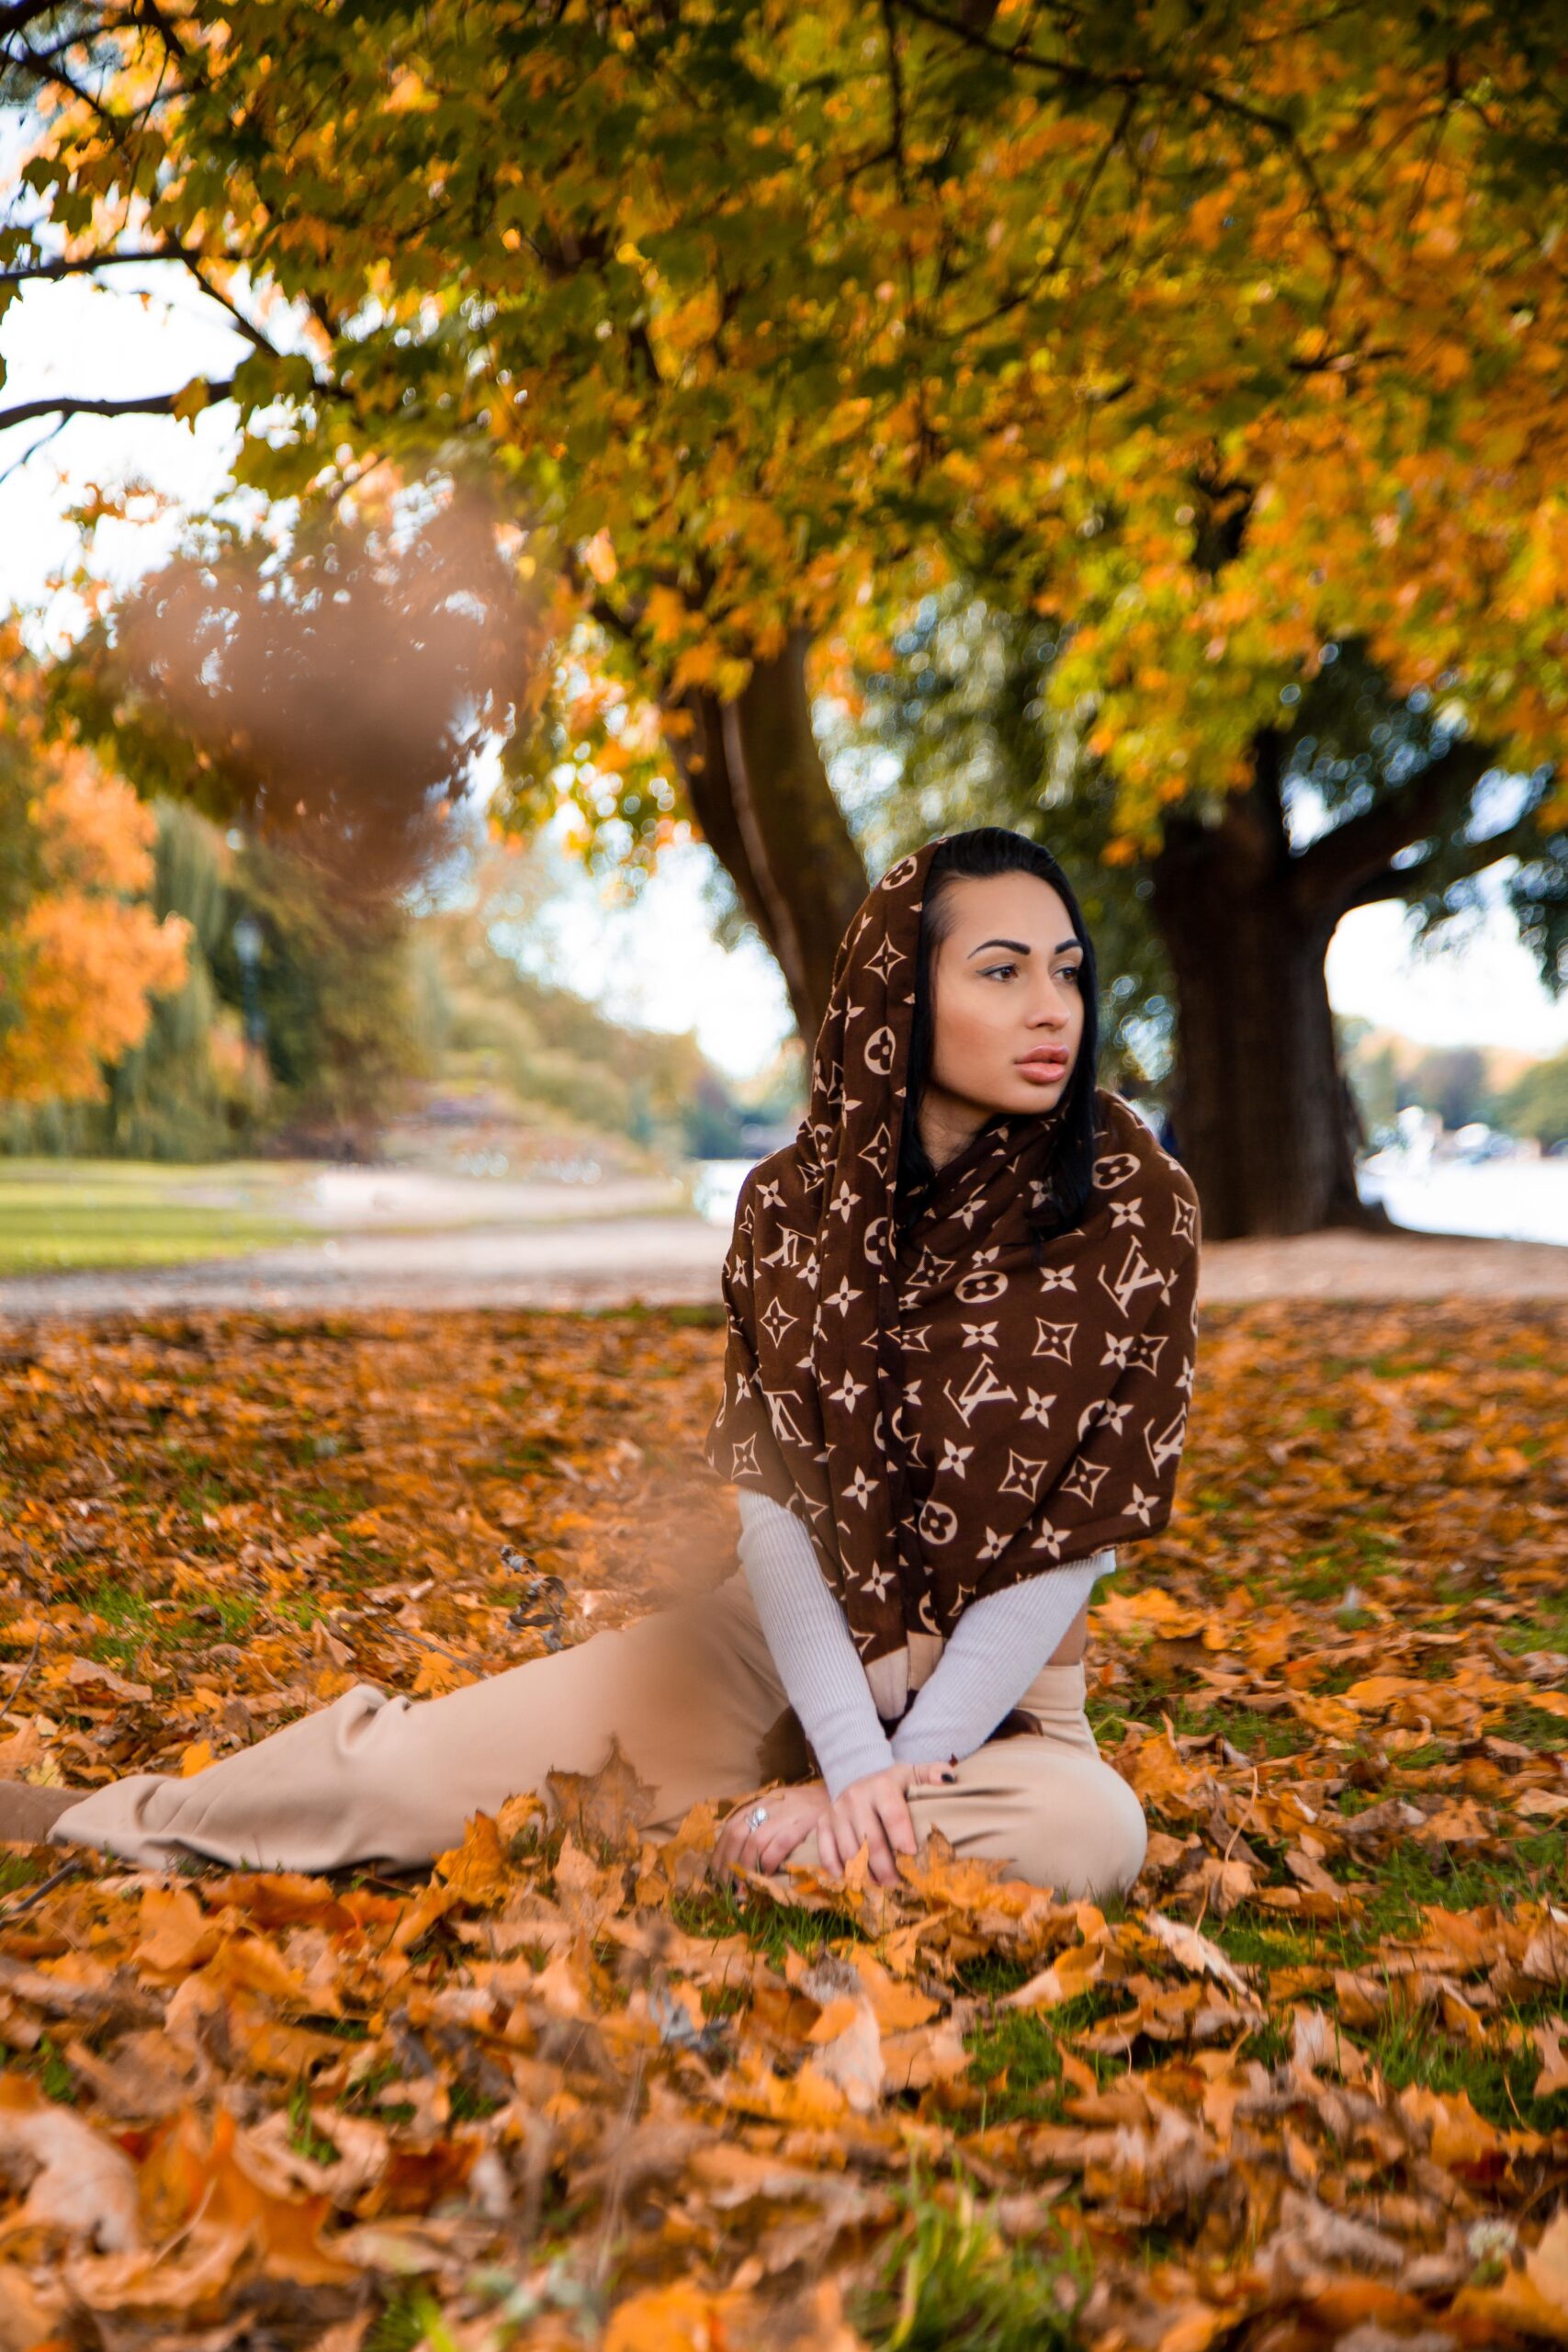 Woman with Louis Vuitton Scarf Sitting on Fallen Leaves 